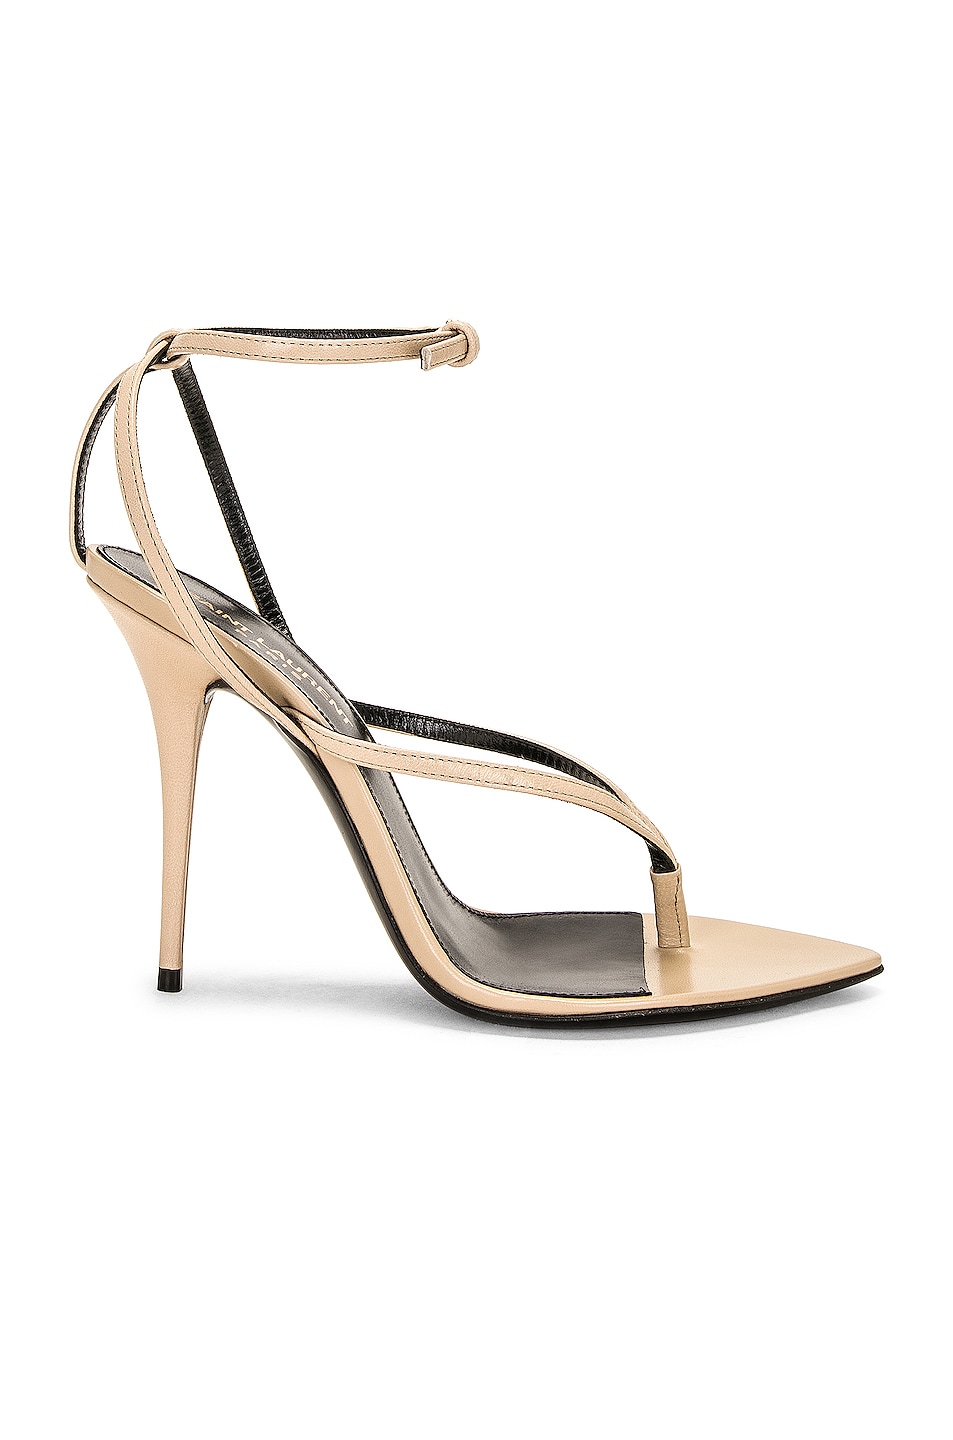 Image 1 of Saint Laurent Gippy Thong Sandal in Trench